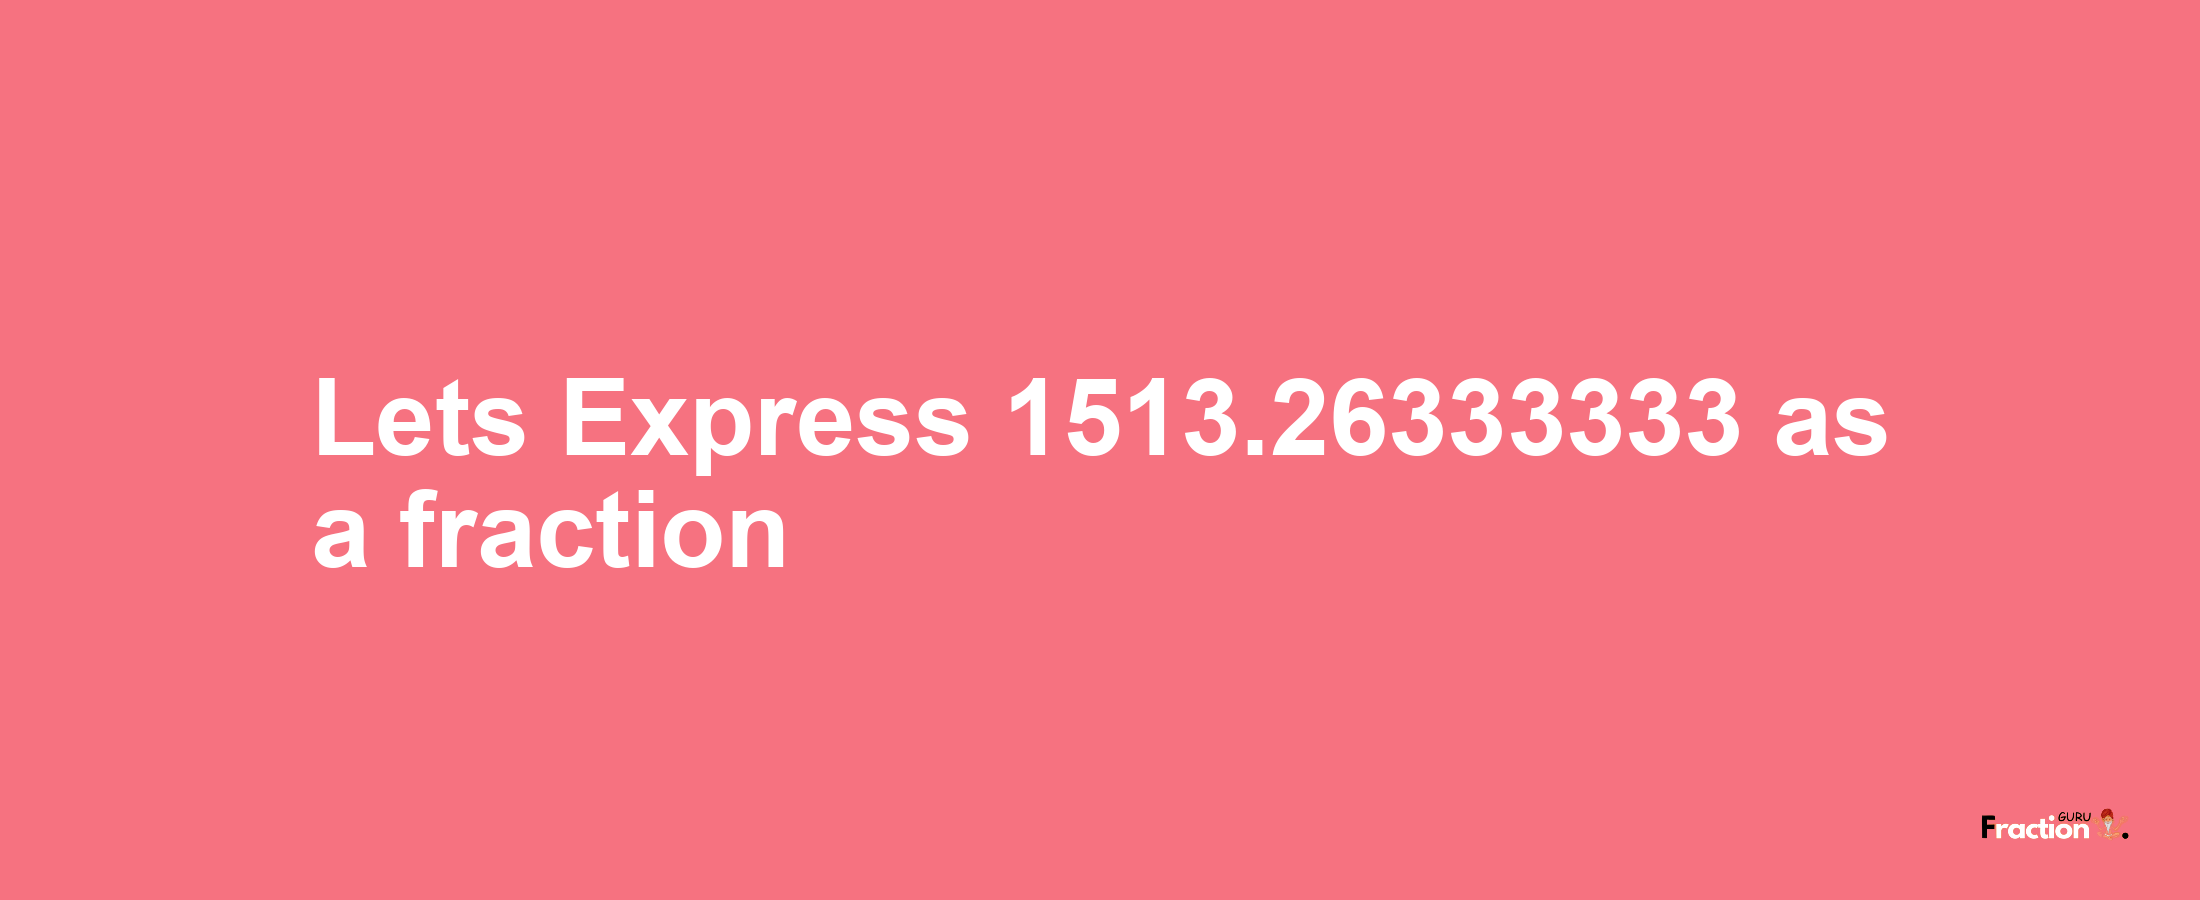 Lets Express 1513.26333333 as afraction